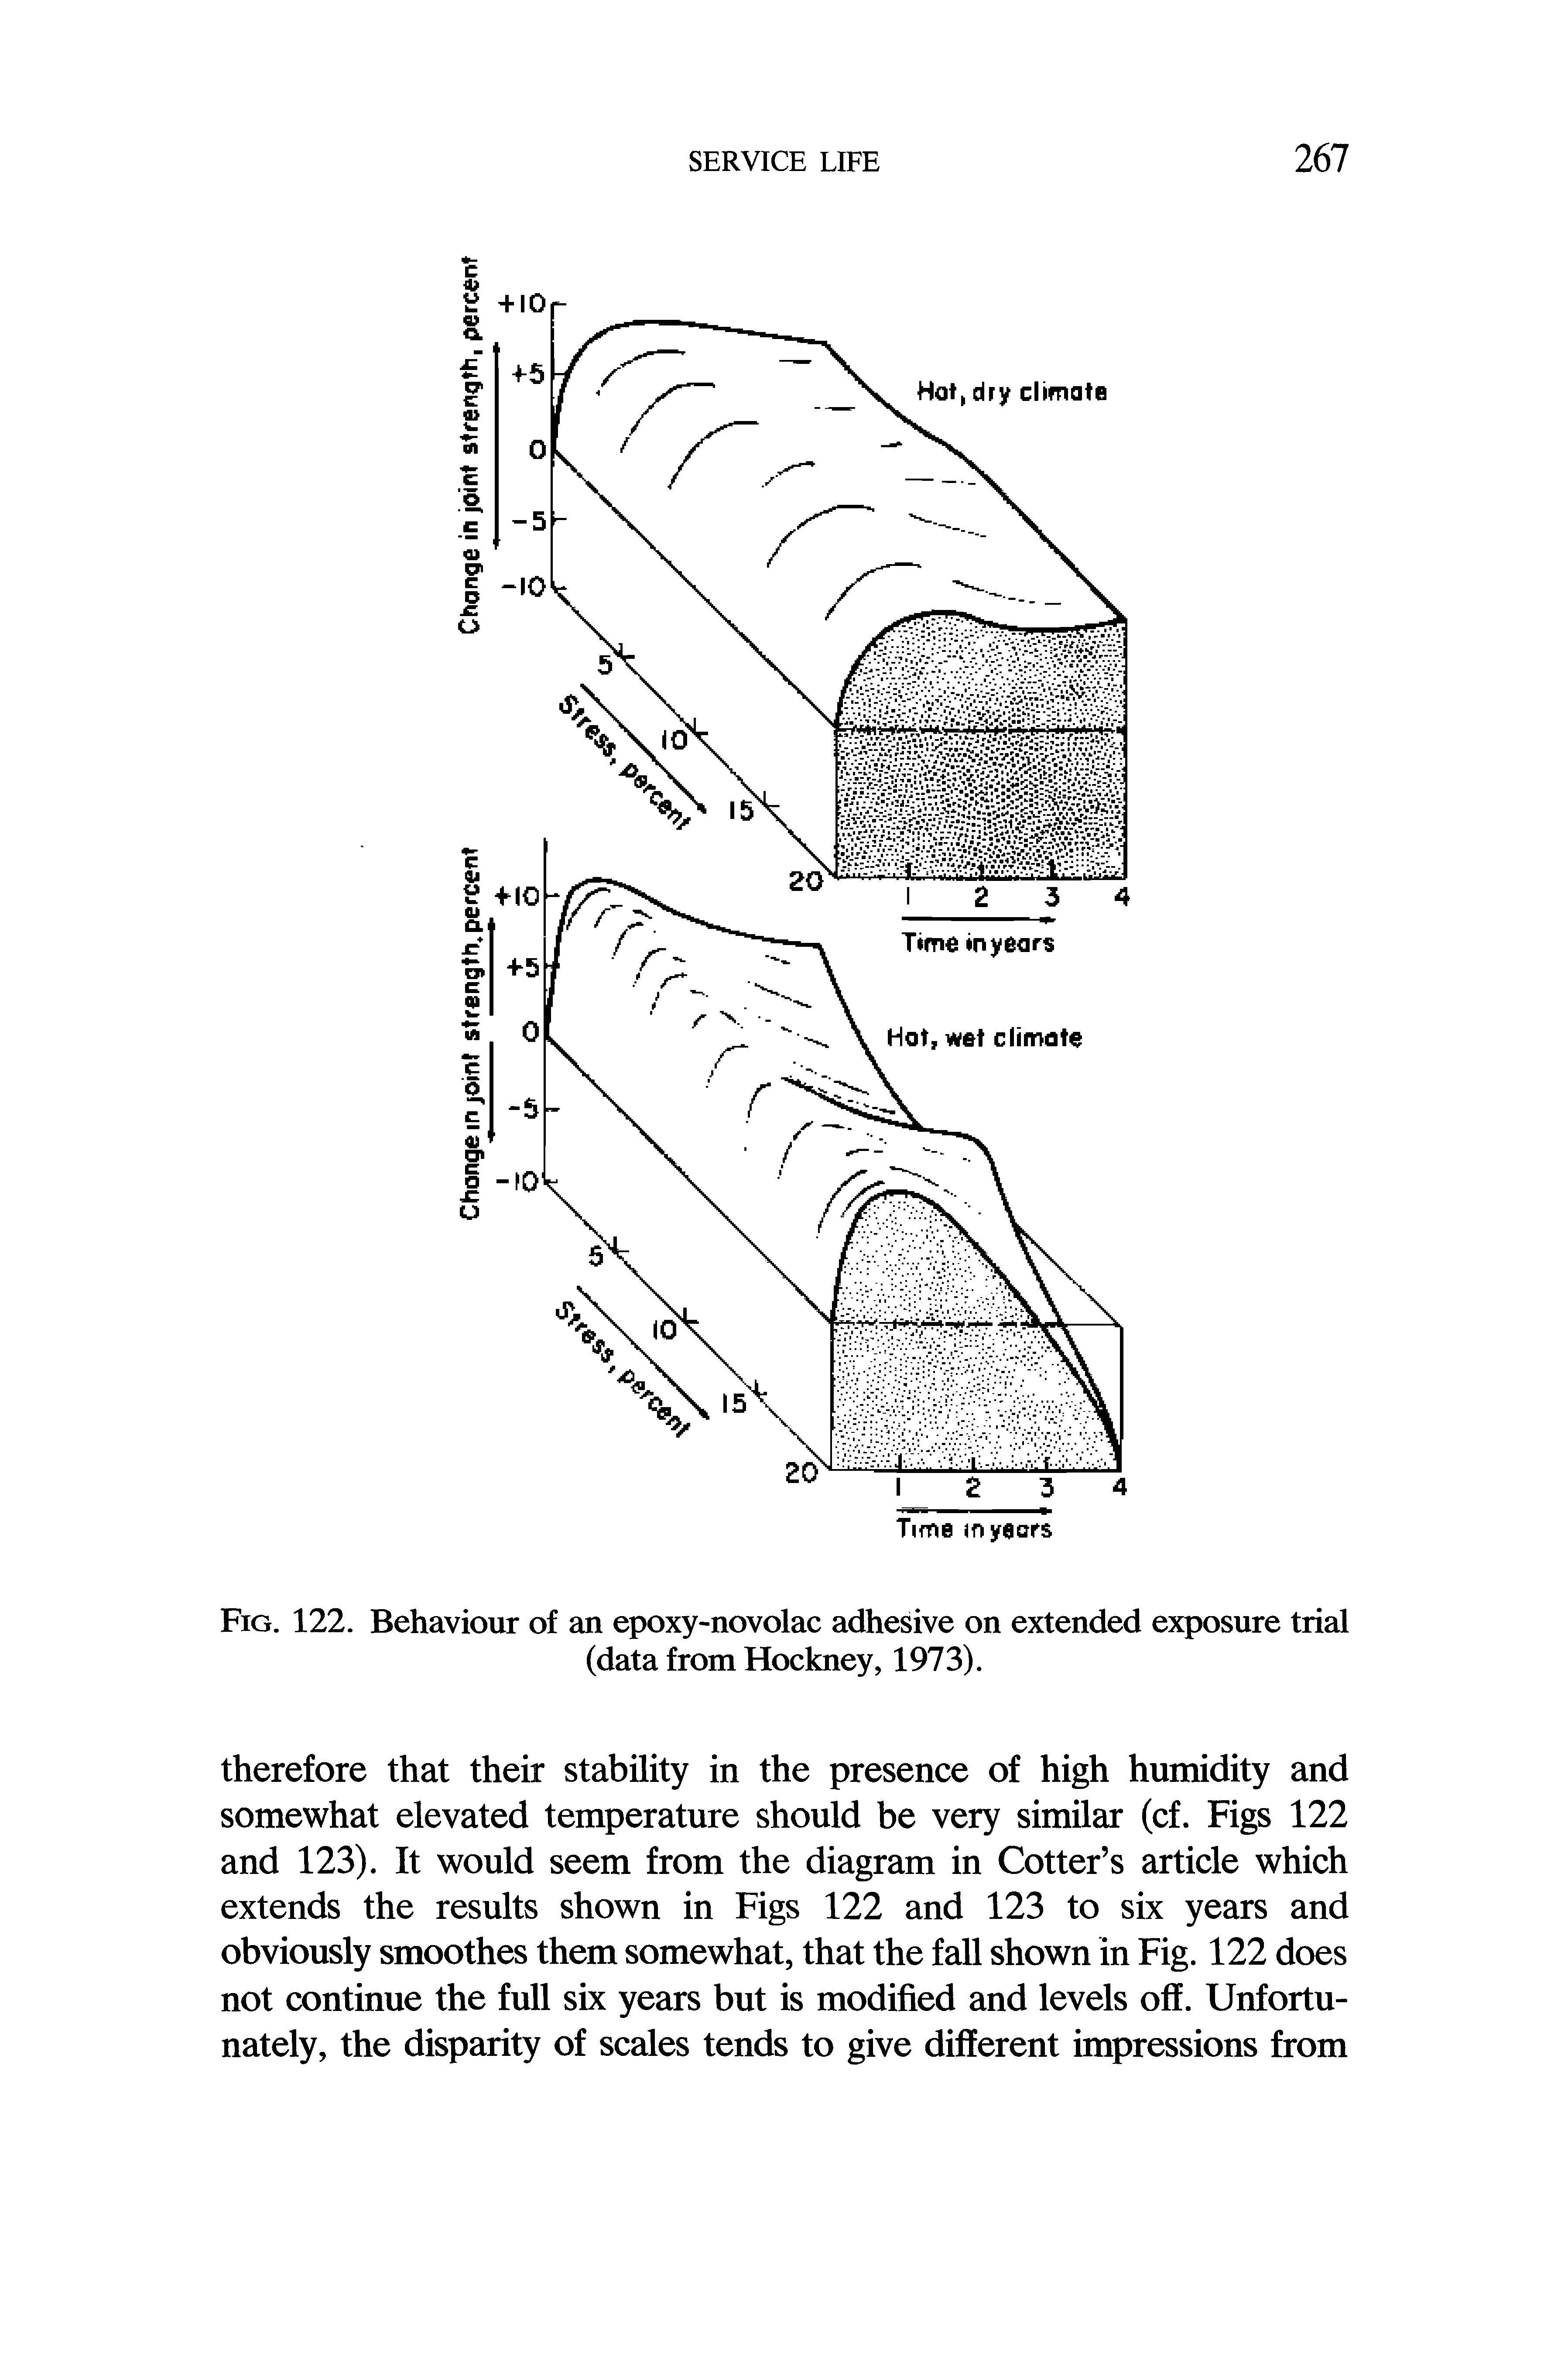 Fig. 122. Behaviour of an epoxy-novolac adhesive on extended exposure trial (data from Hockney, 1973).